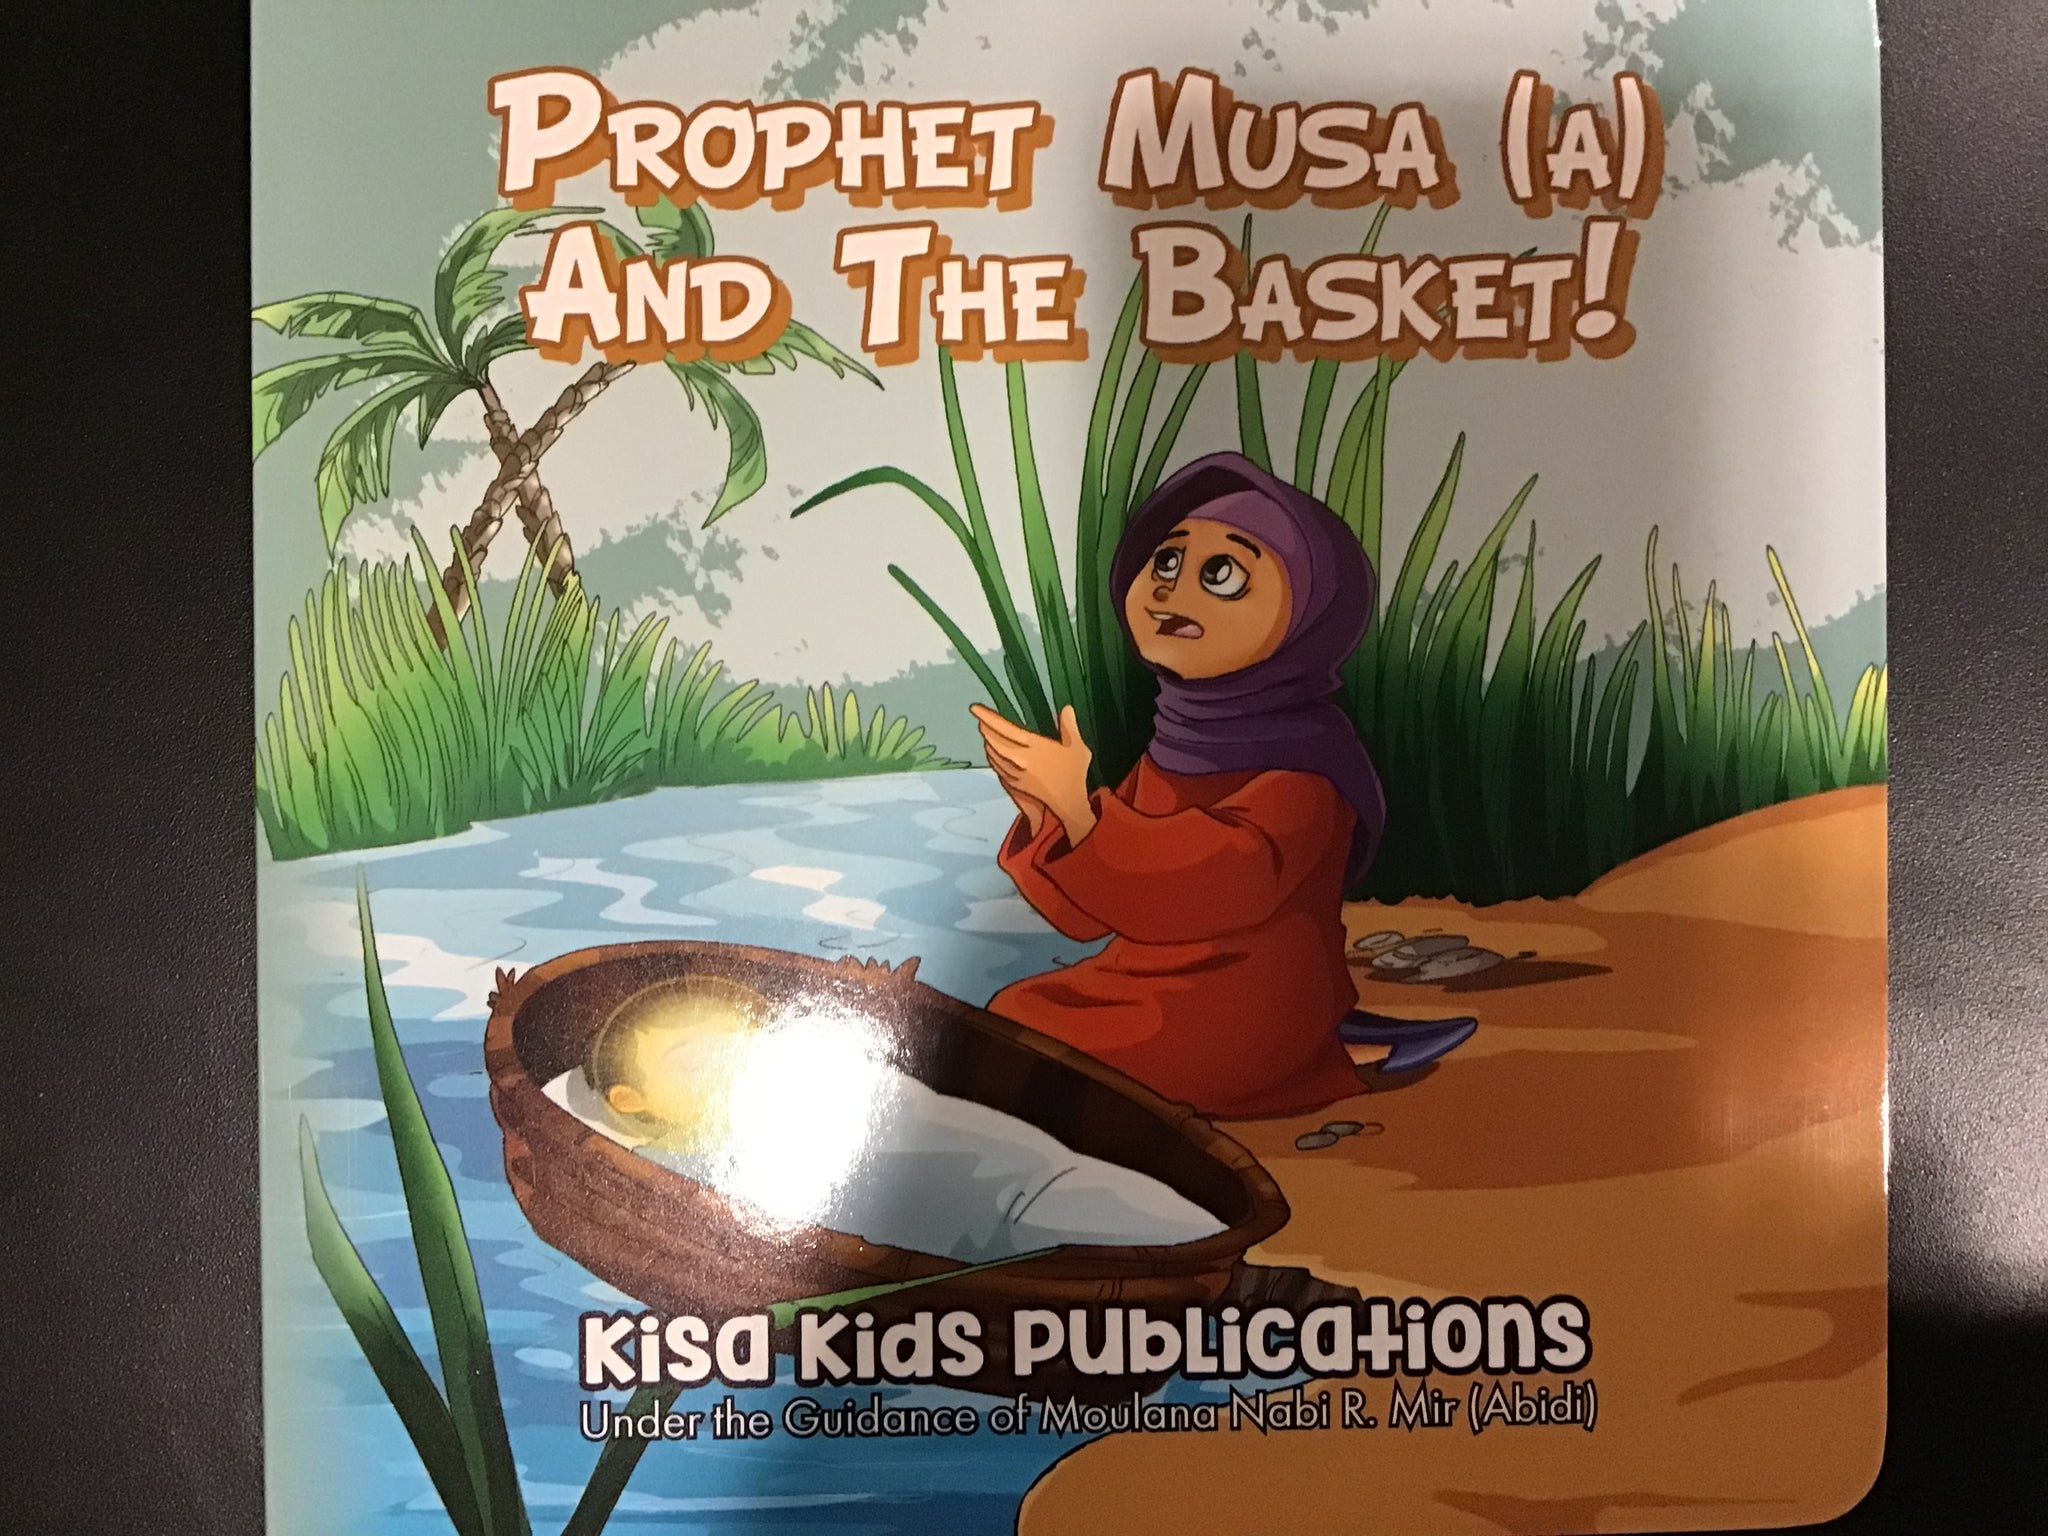 Prophet Musa (A) And The Basket!